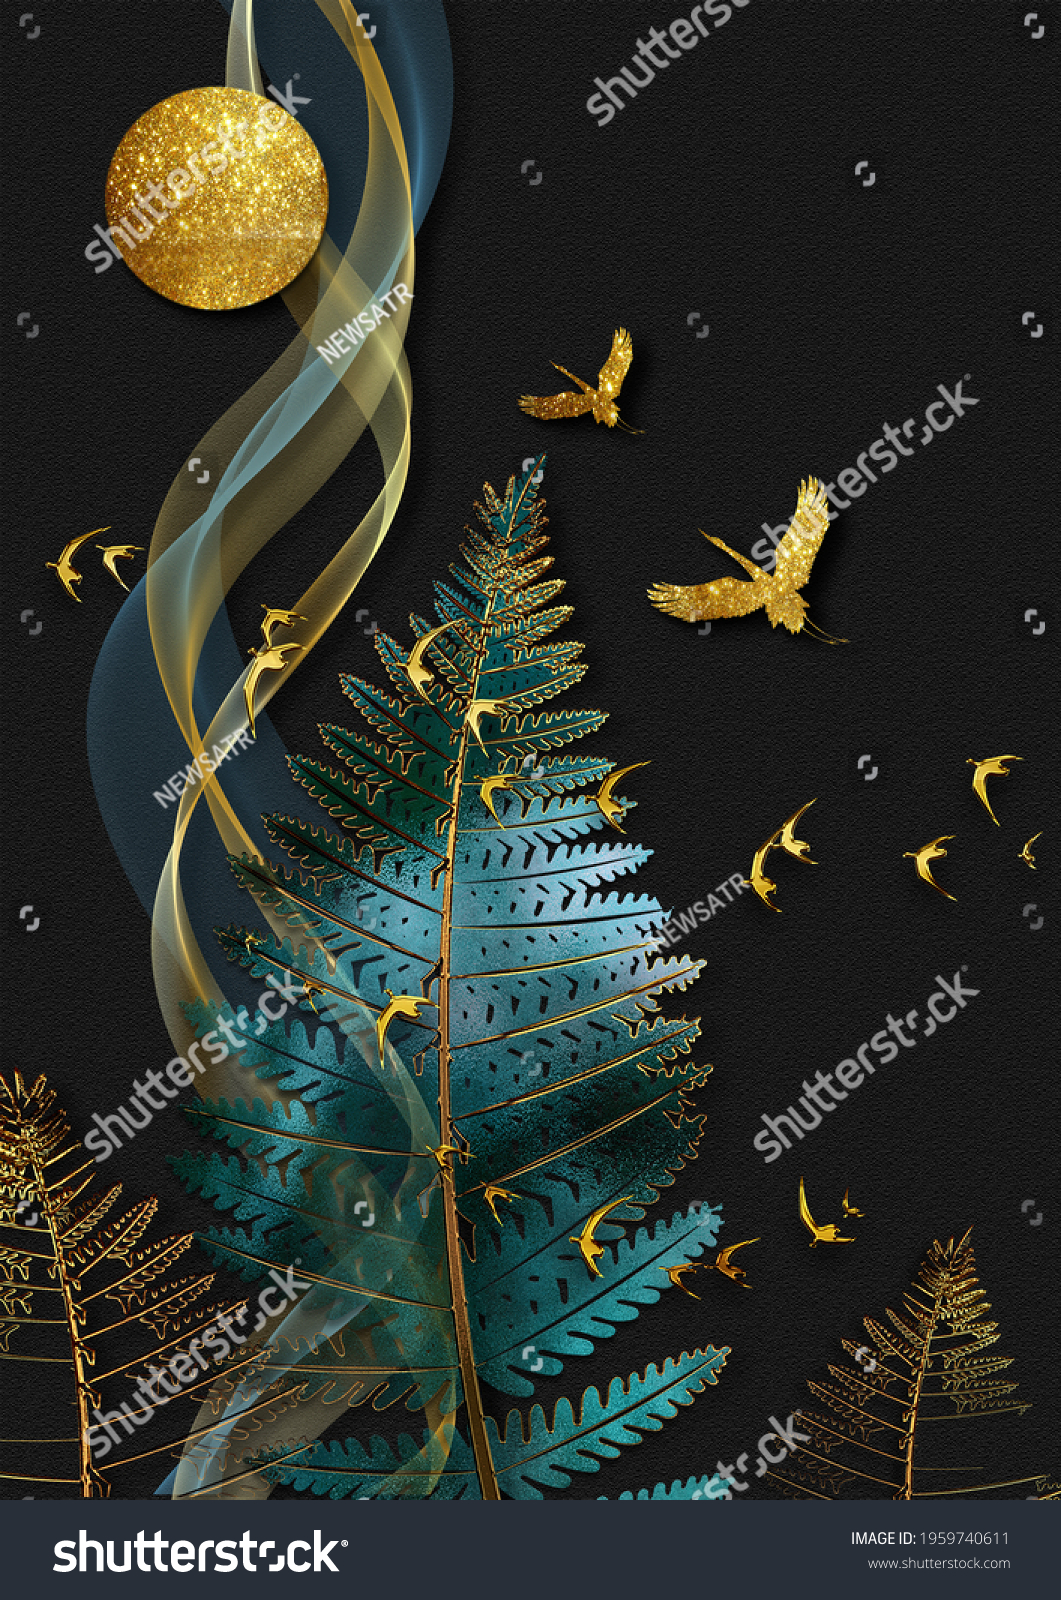 3d illustration of leaves, flock of birds and the moon